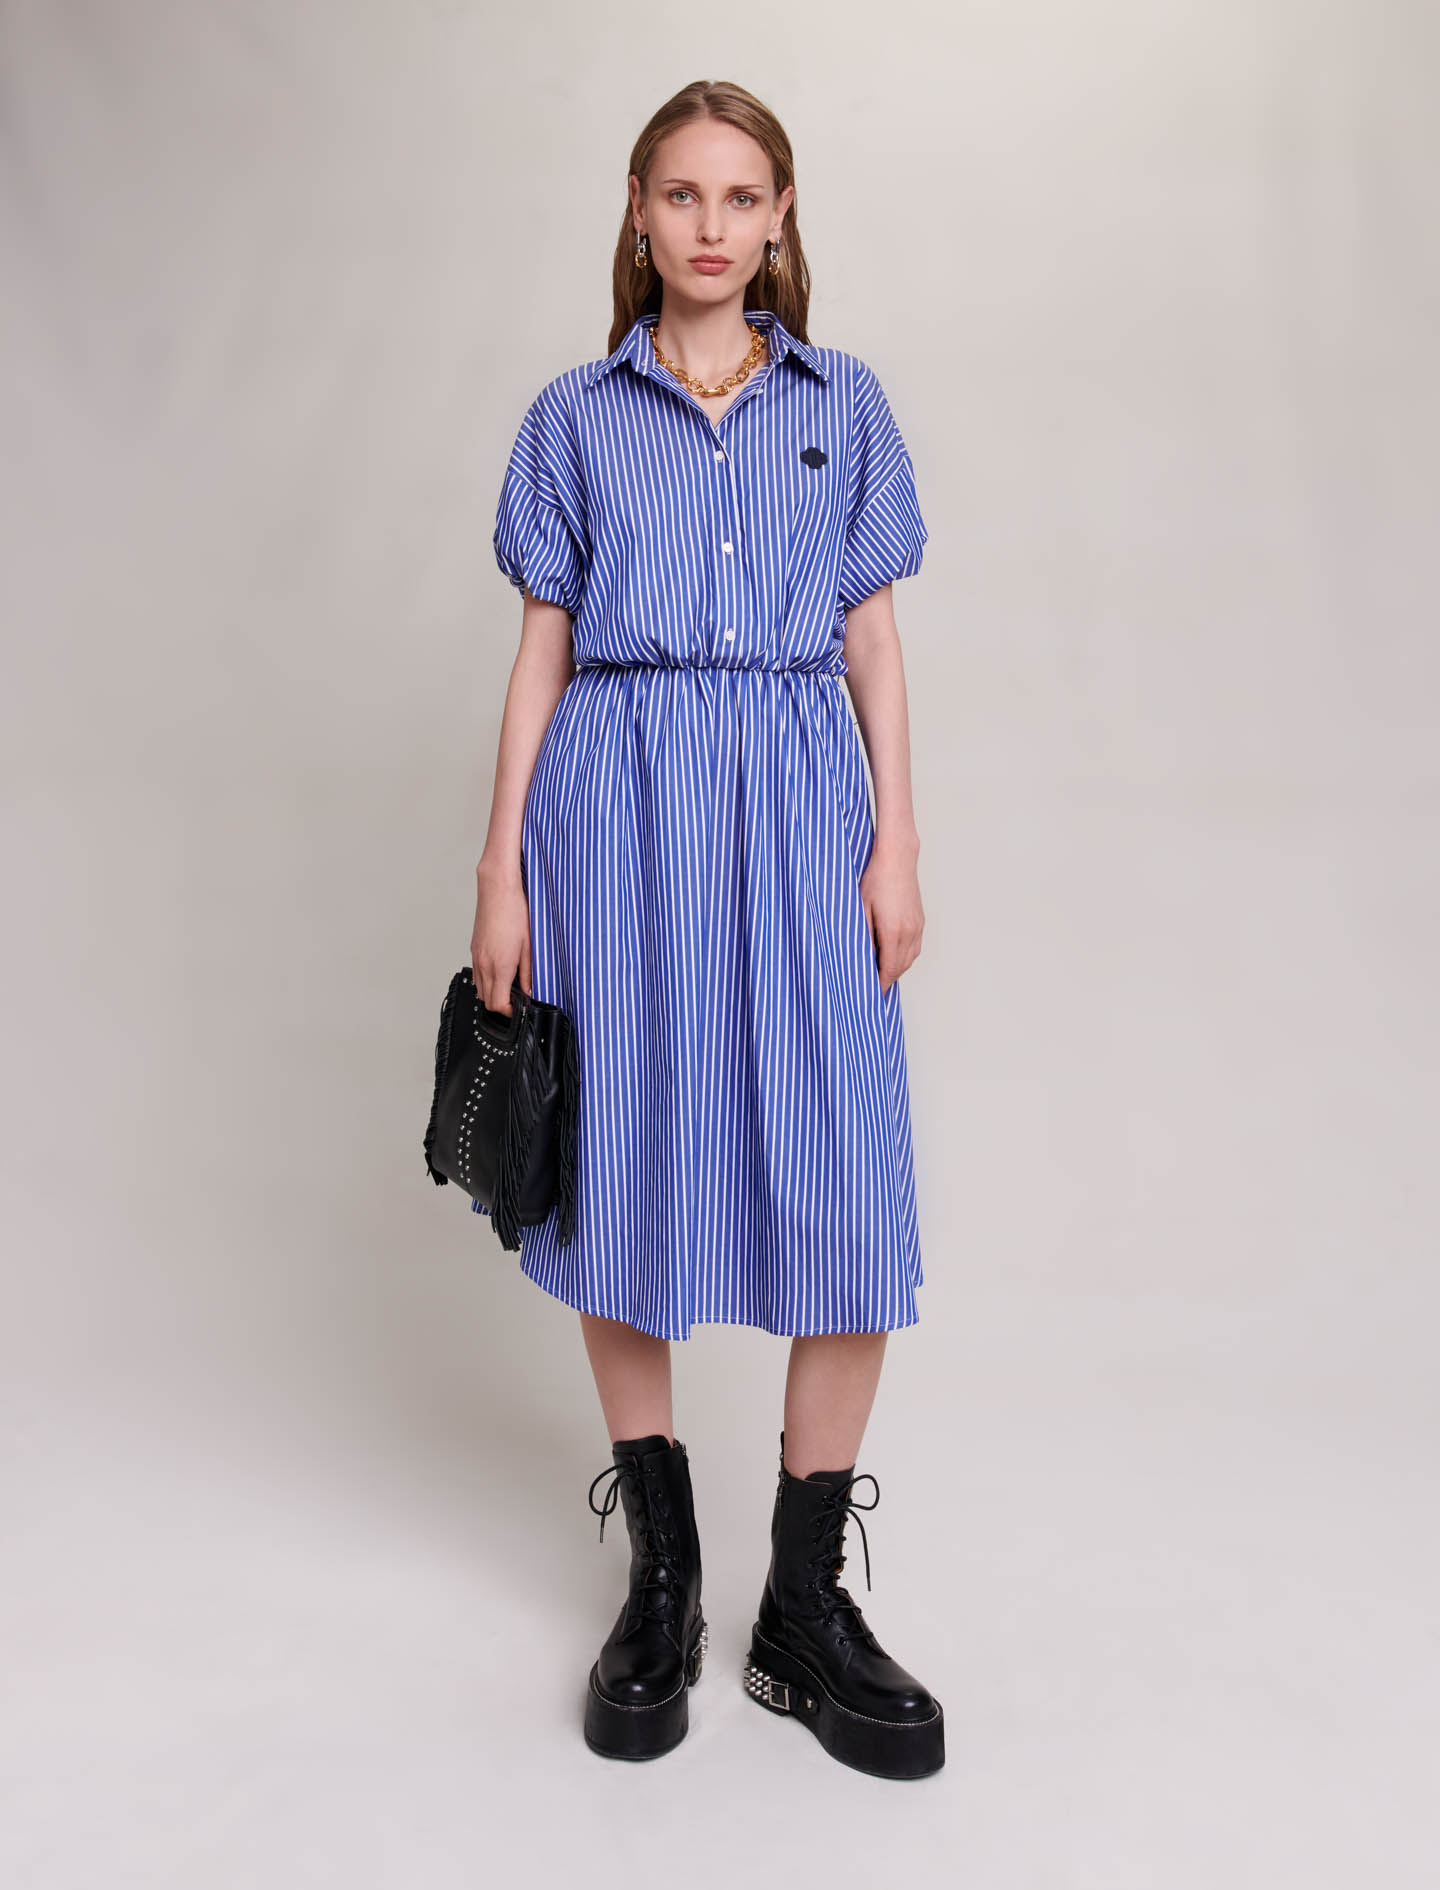 Maje Woman's cotton Patch: Long striped shirt dress for Fall/Winter, in color Blue / Blue